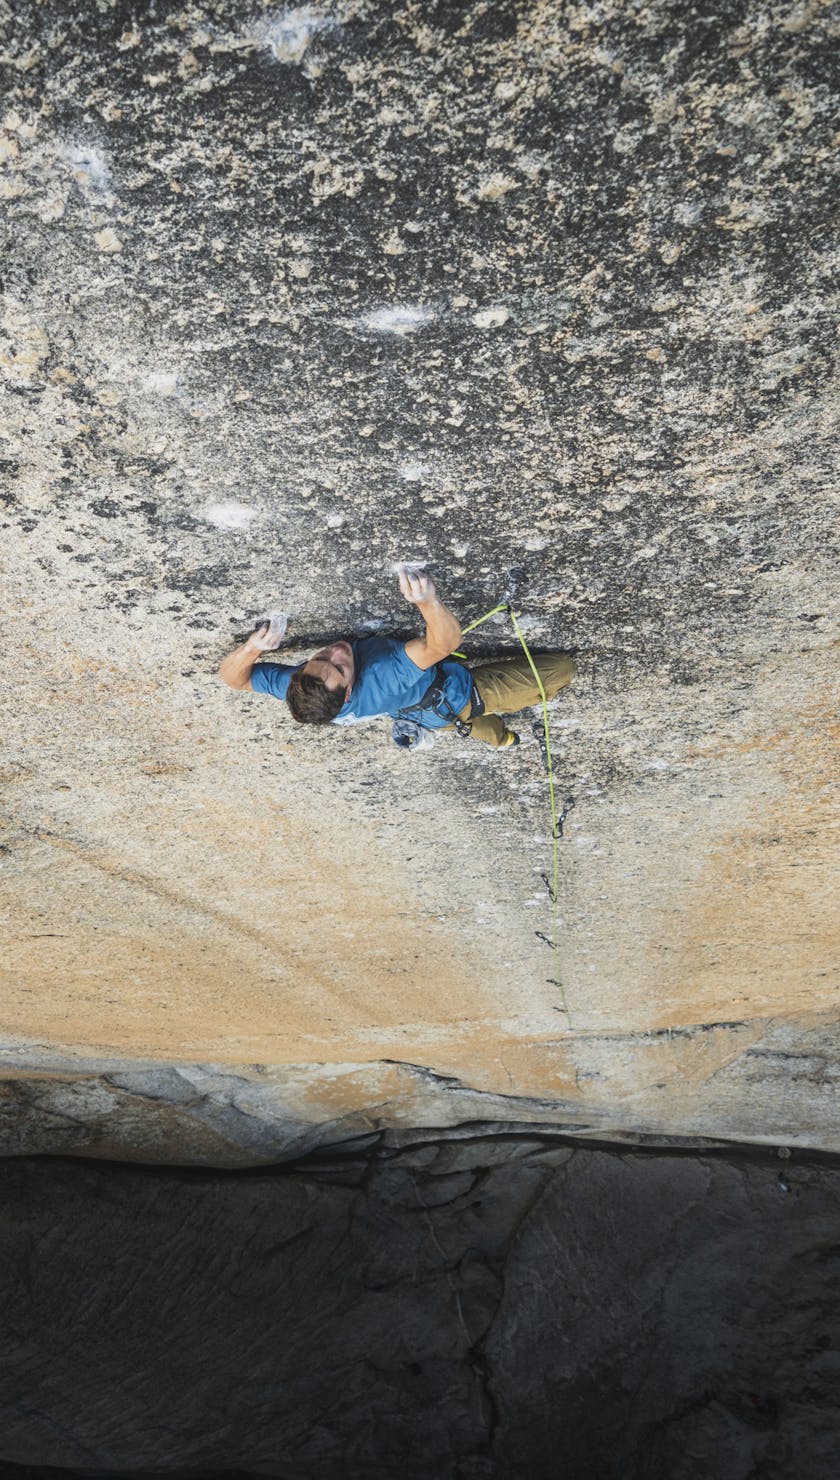 Spring Outlet Sale. BD athlete Conor Herson climbing in Yosemite, CA. 